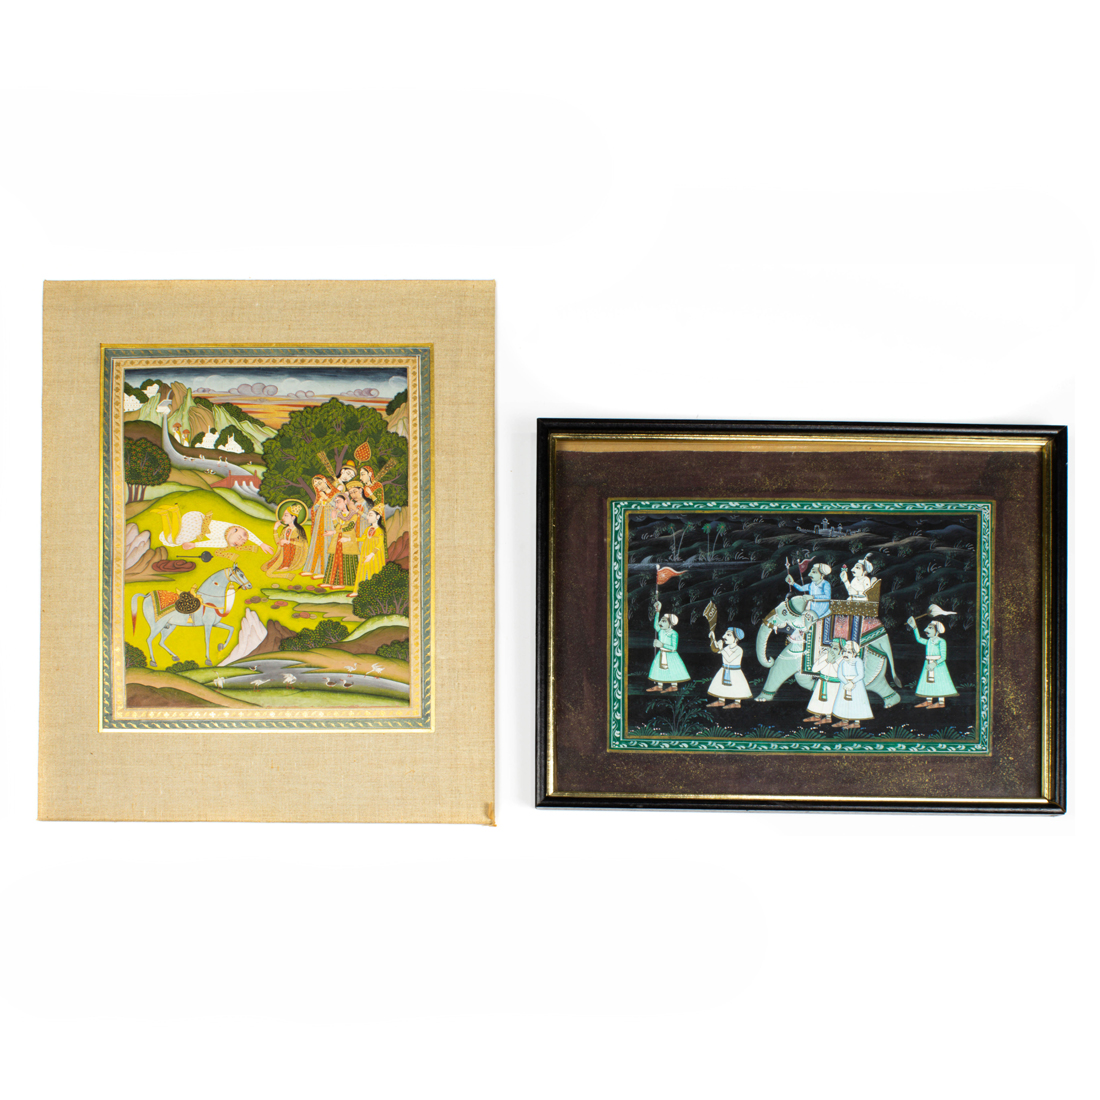  LOT OF 4 INDIAN MINIATURE PAINTINGS 2d21c6